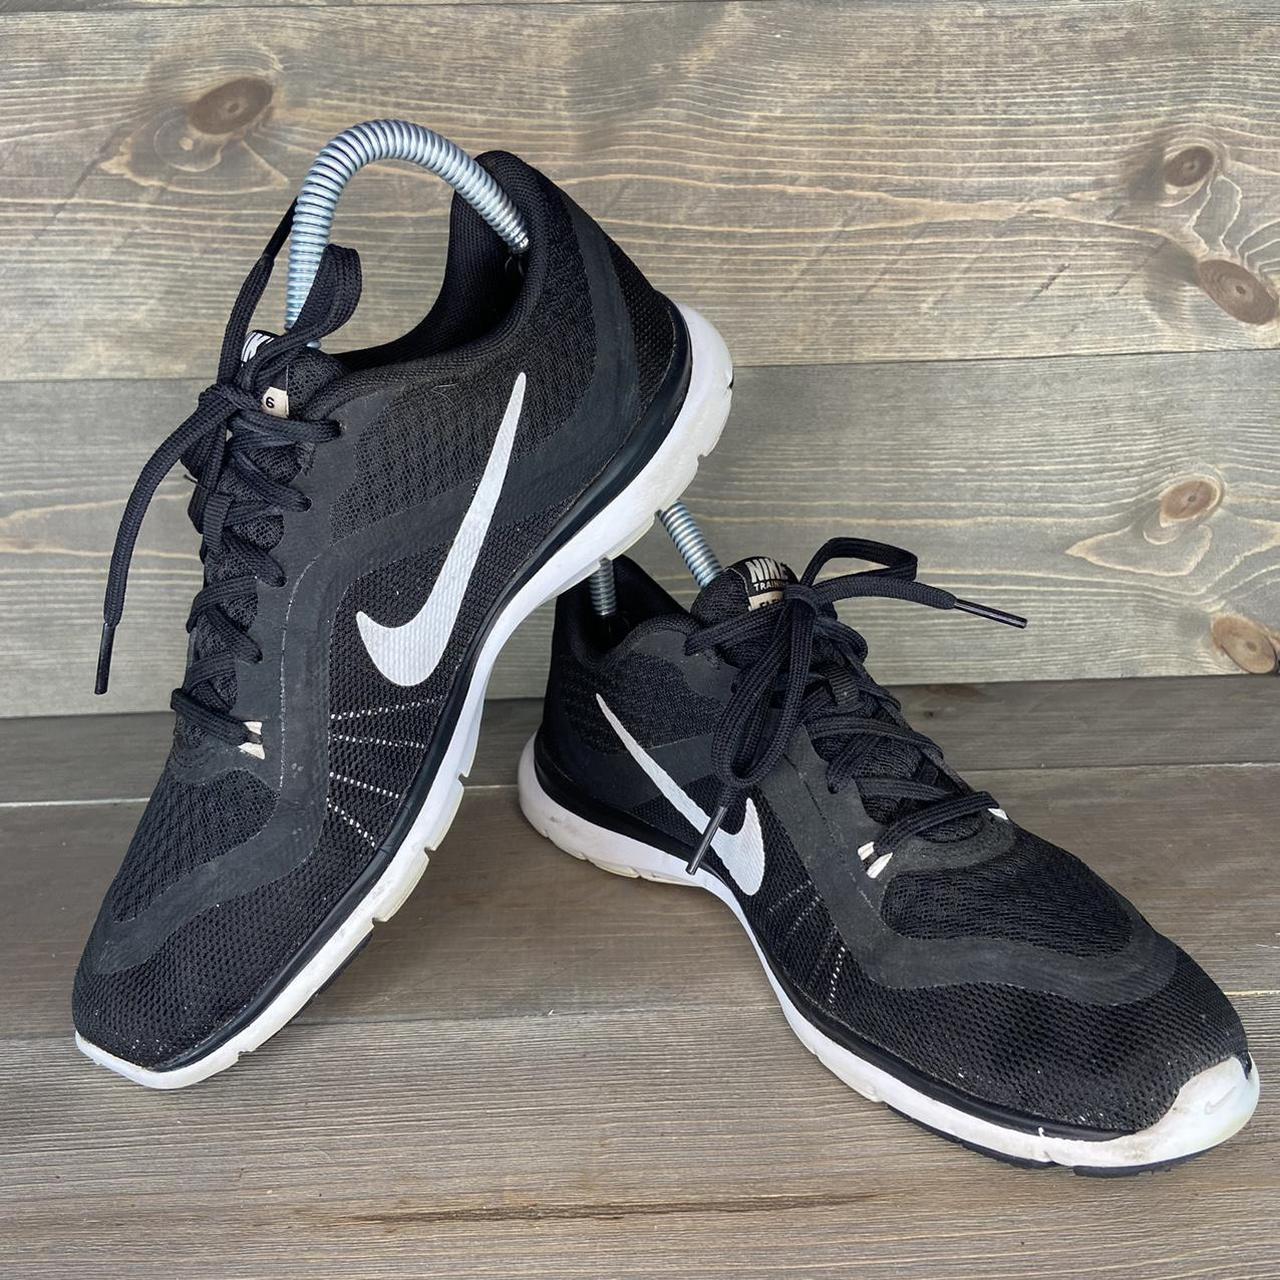 Product Image 2 - Nike flex trainer 6 sneakers.